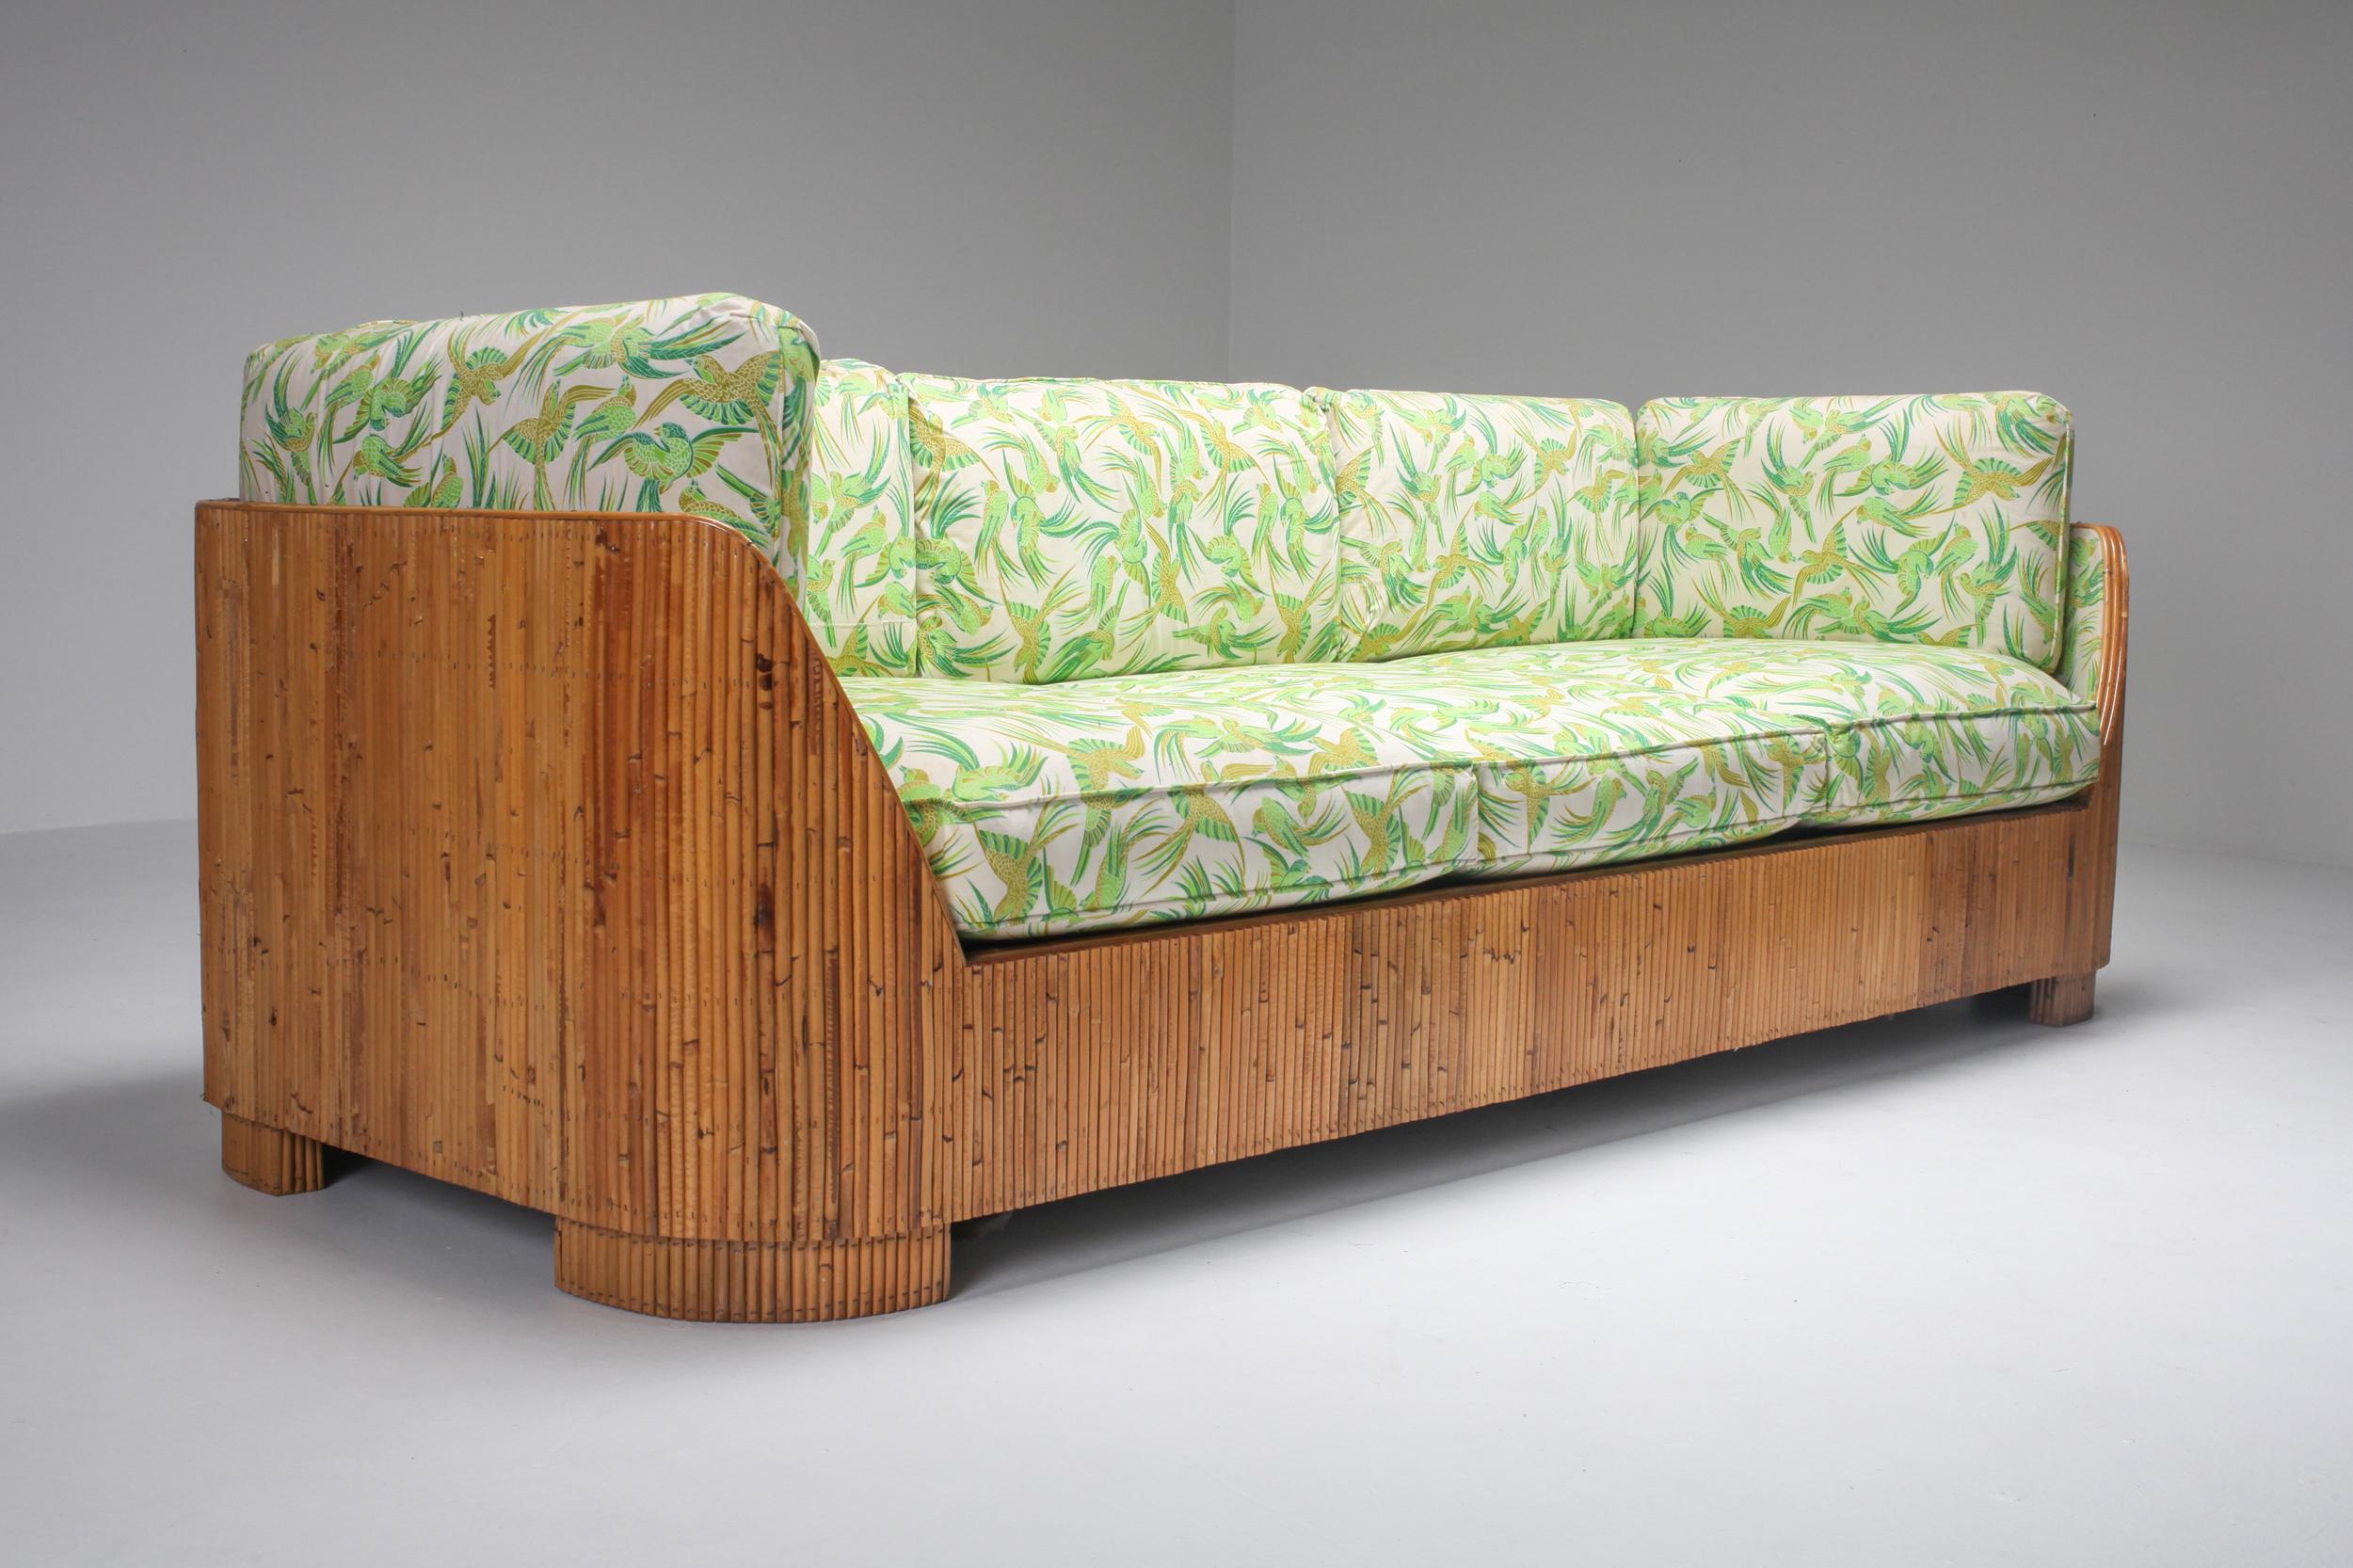 Late 20th Century Bamboo Couch by Vivai del Sud